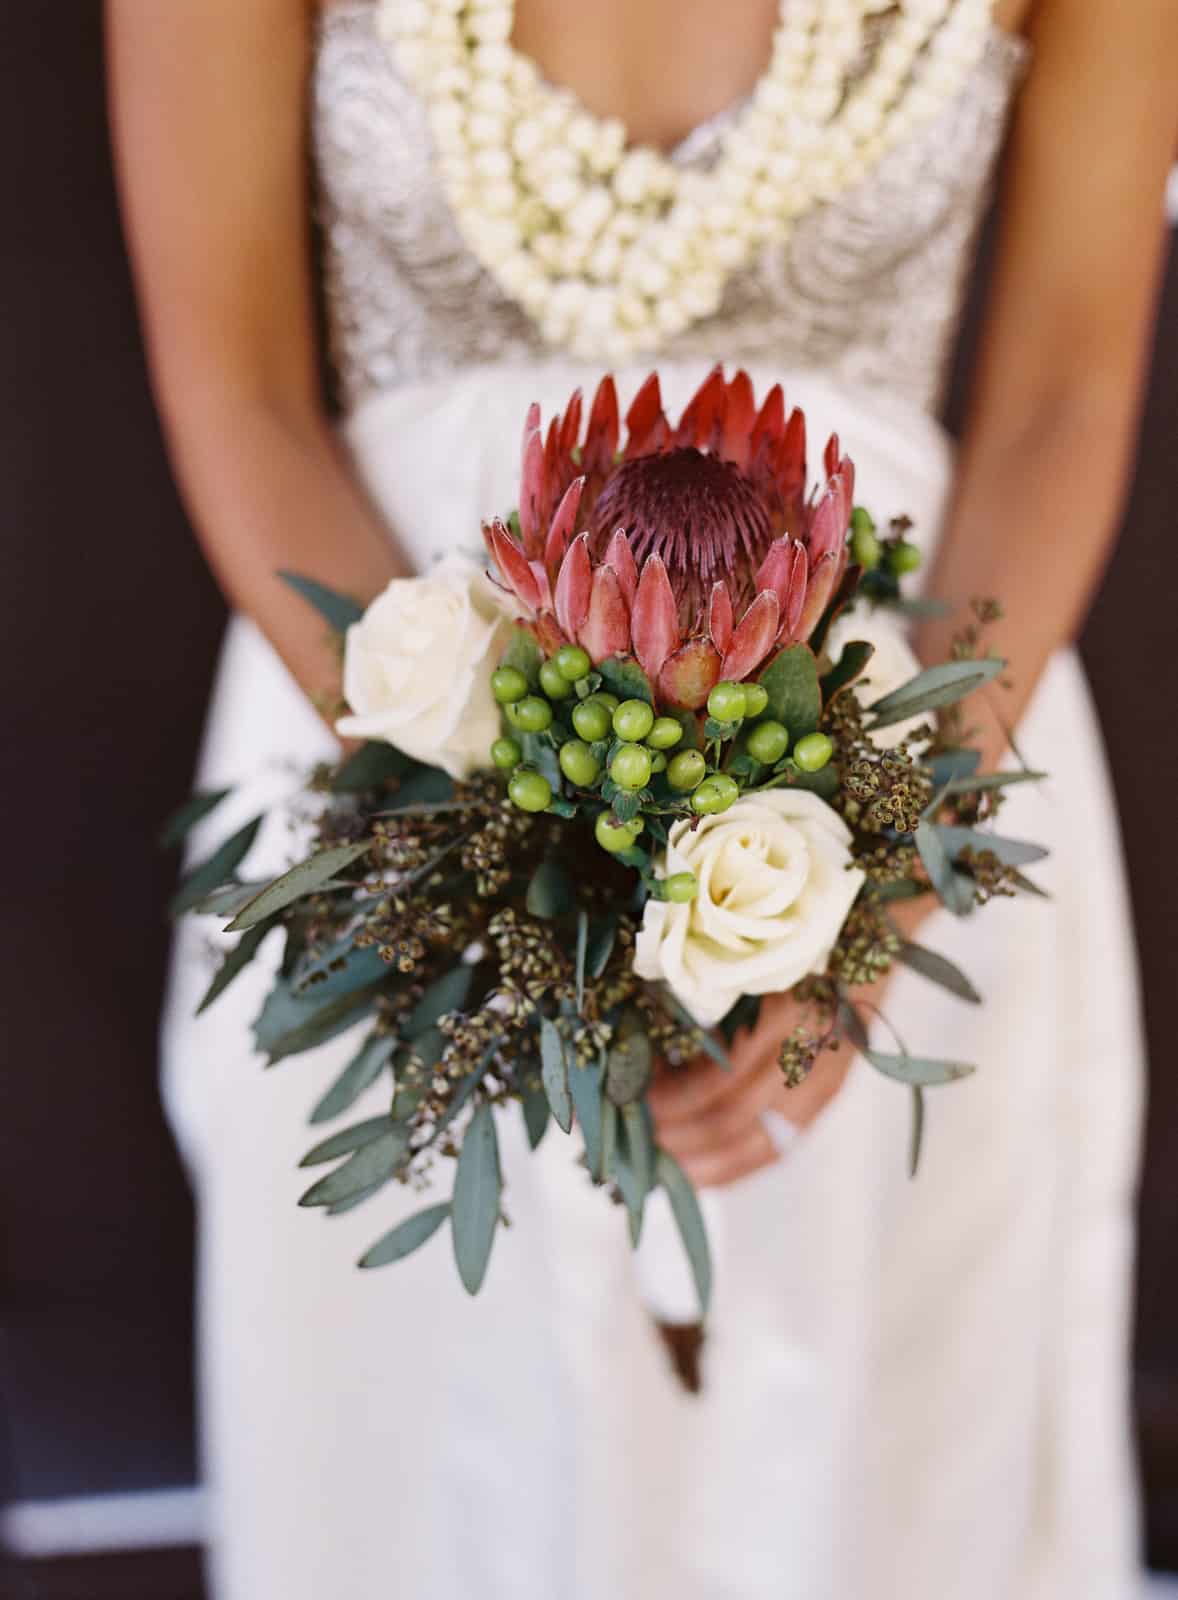 Protea and white rose bouquet